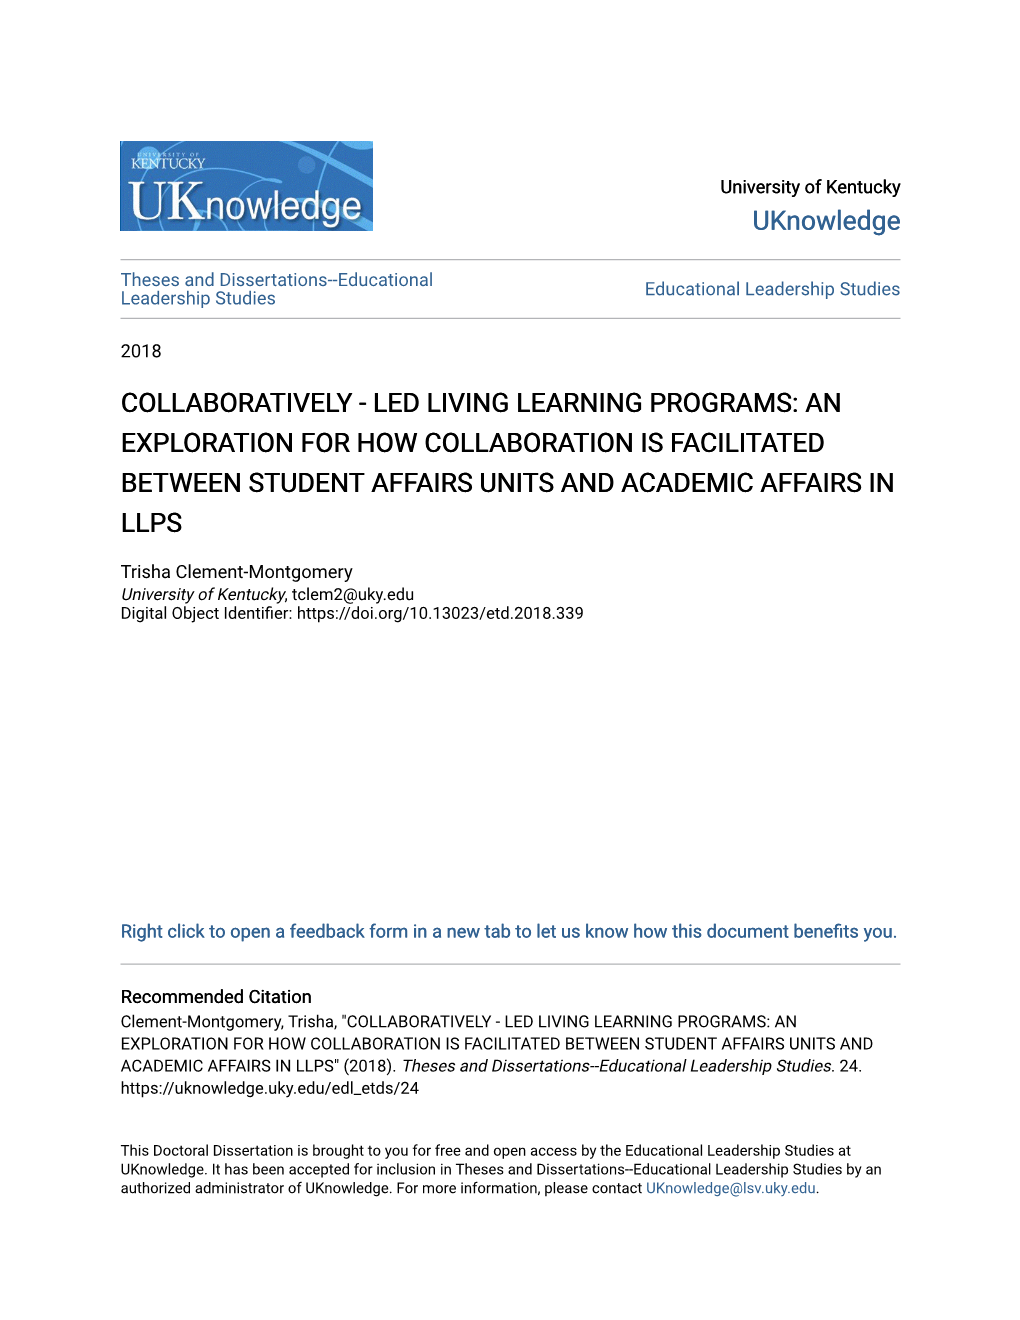 Collaboratively - Led Living Learning Programs: an Exploration for How Collaboration Is Facilitated Between Student Affairs Units and Academic Affairs in Llps